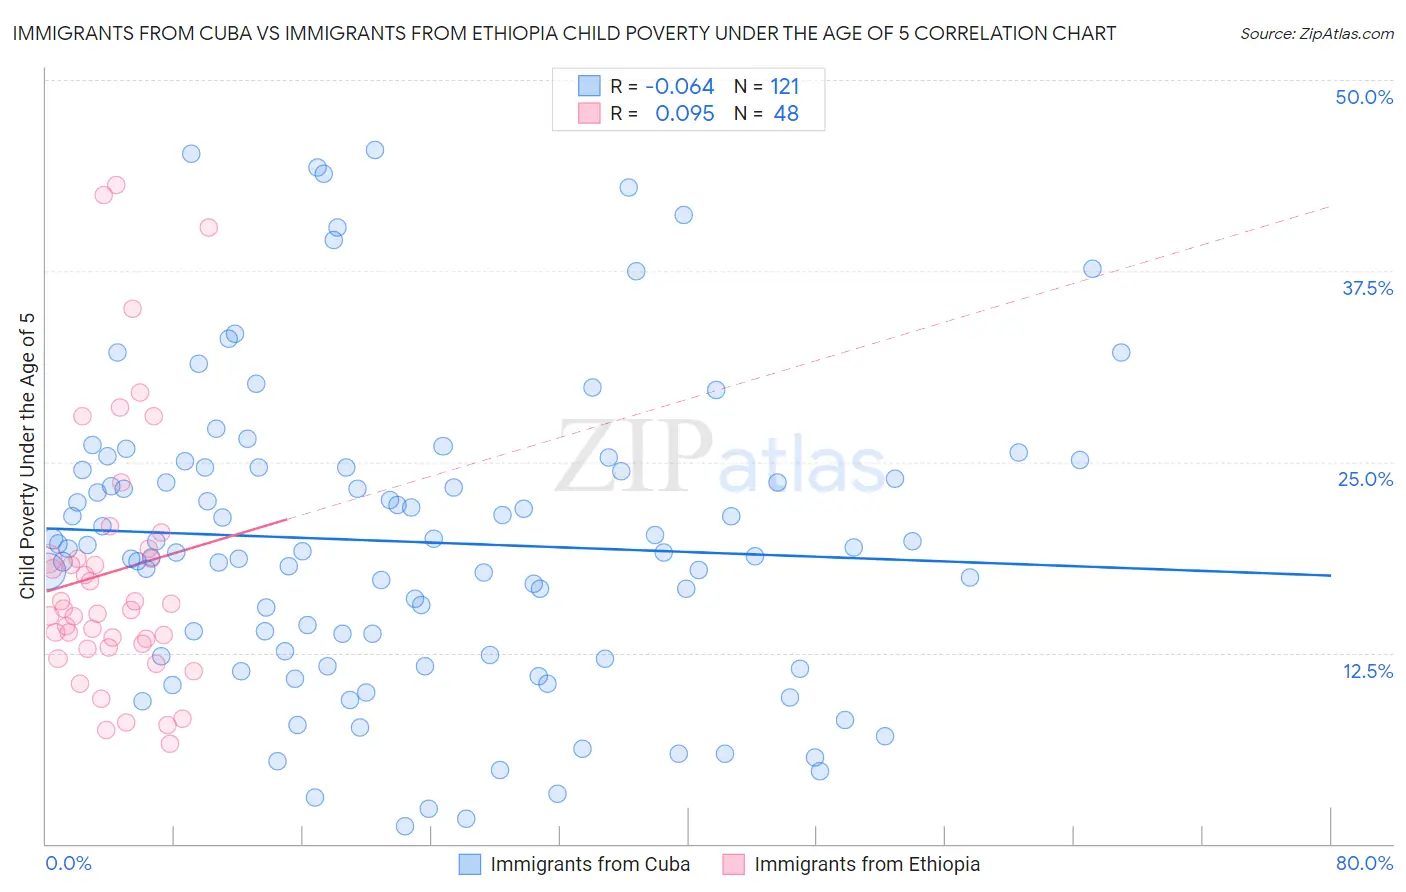 Immigrants from Cuba vs Immigrants from Ethiopia Child Poverty Under the Age of 5